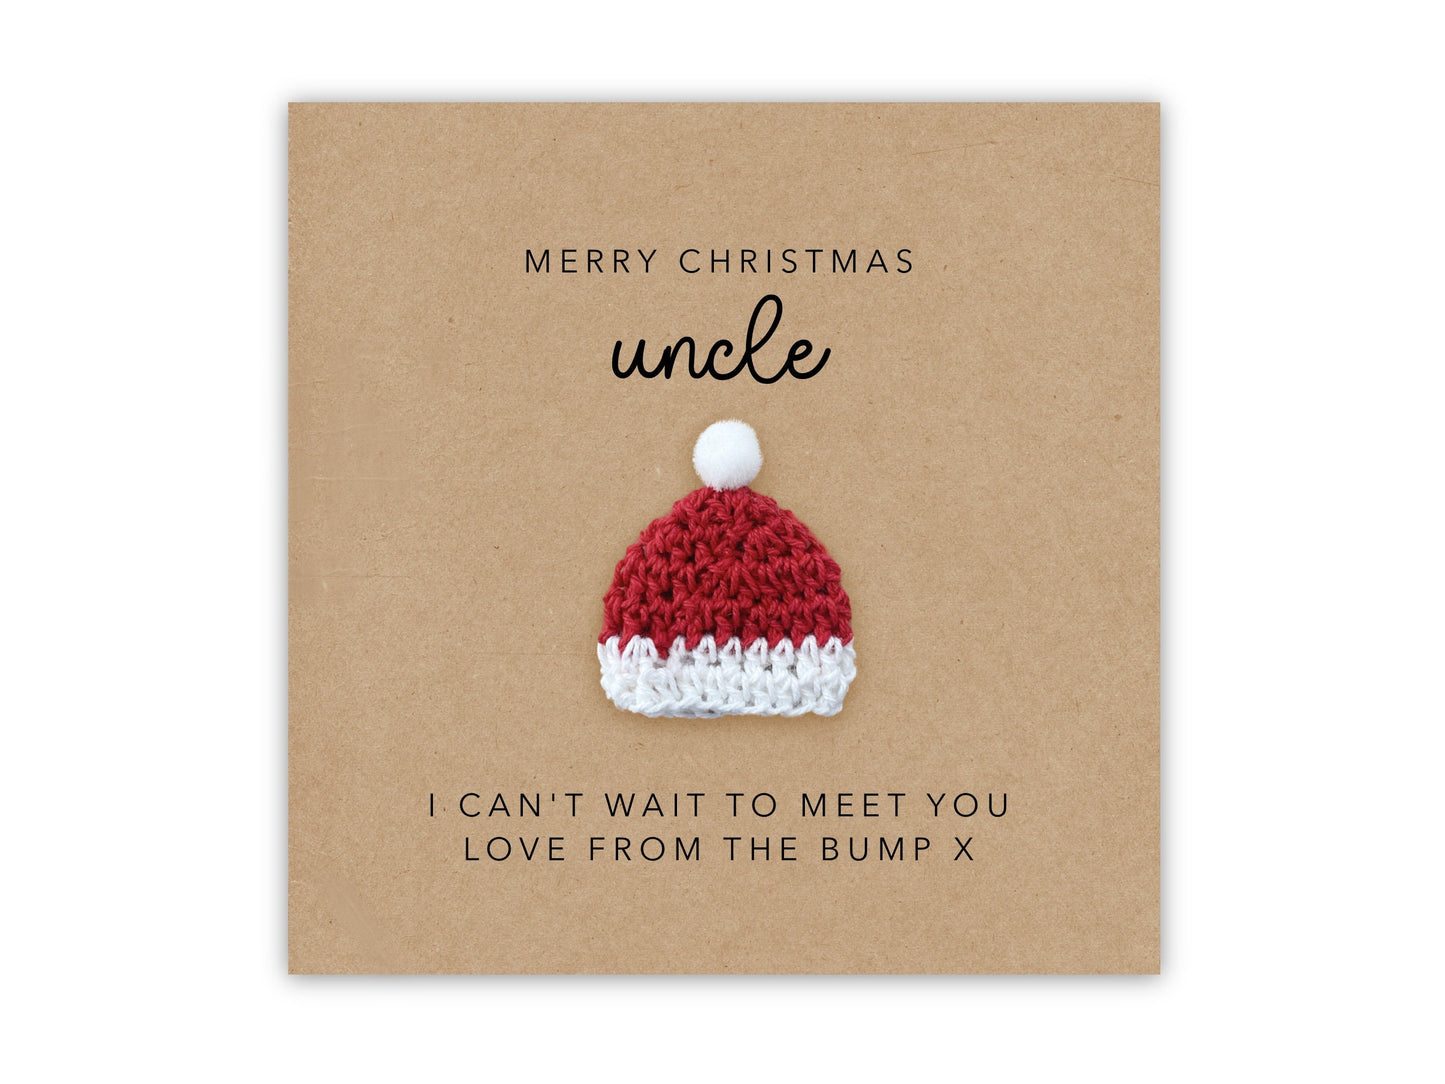 Merry Christmas Uncle From Bump, Cute Christmas Card For Uncle, Uncle To be Christmas Card, Cute Christmas Card From Bump, Uncle to be